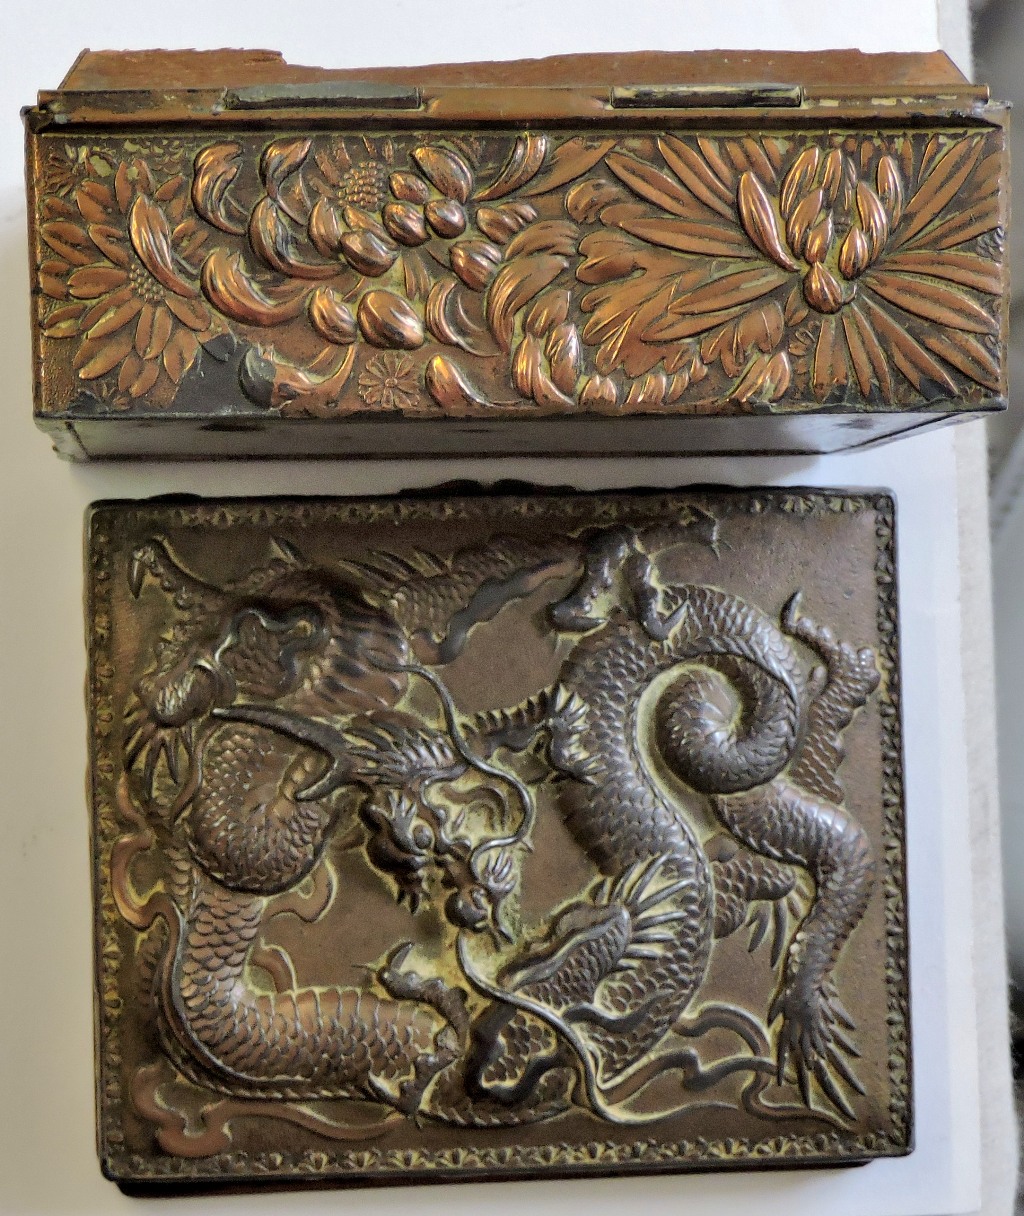 A small box in Chinese style. Made from a copper coated metal with a pine interior for holding